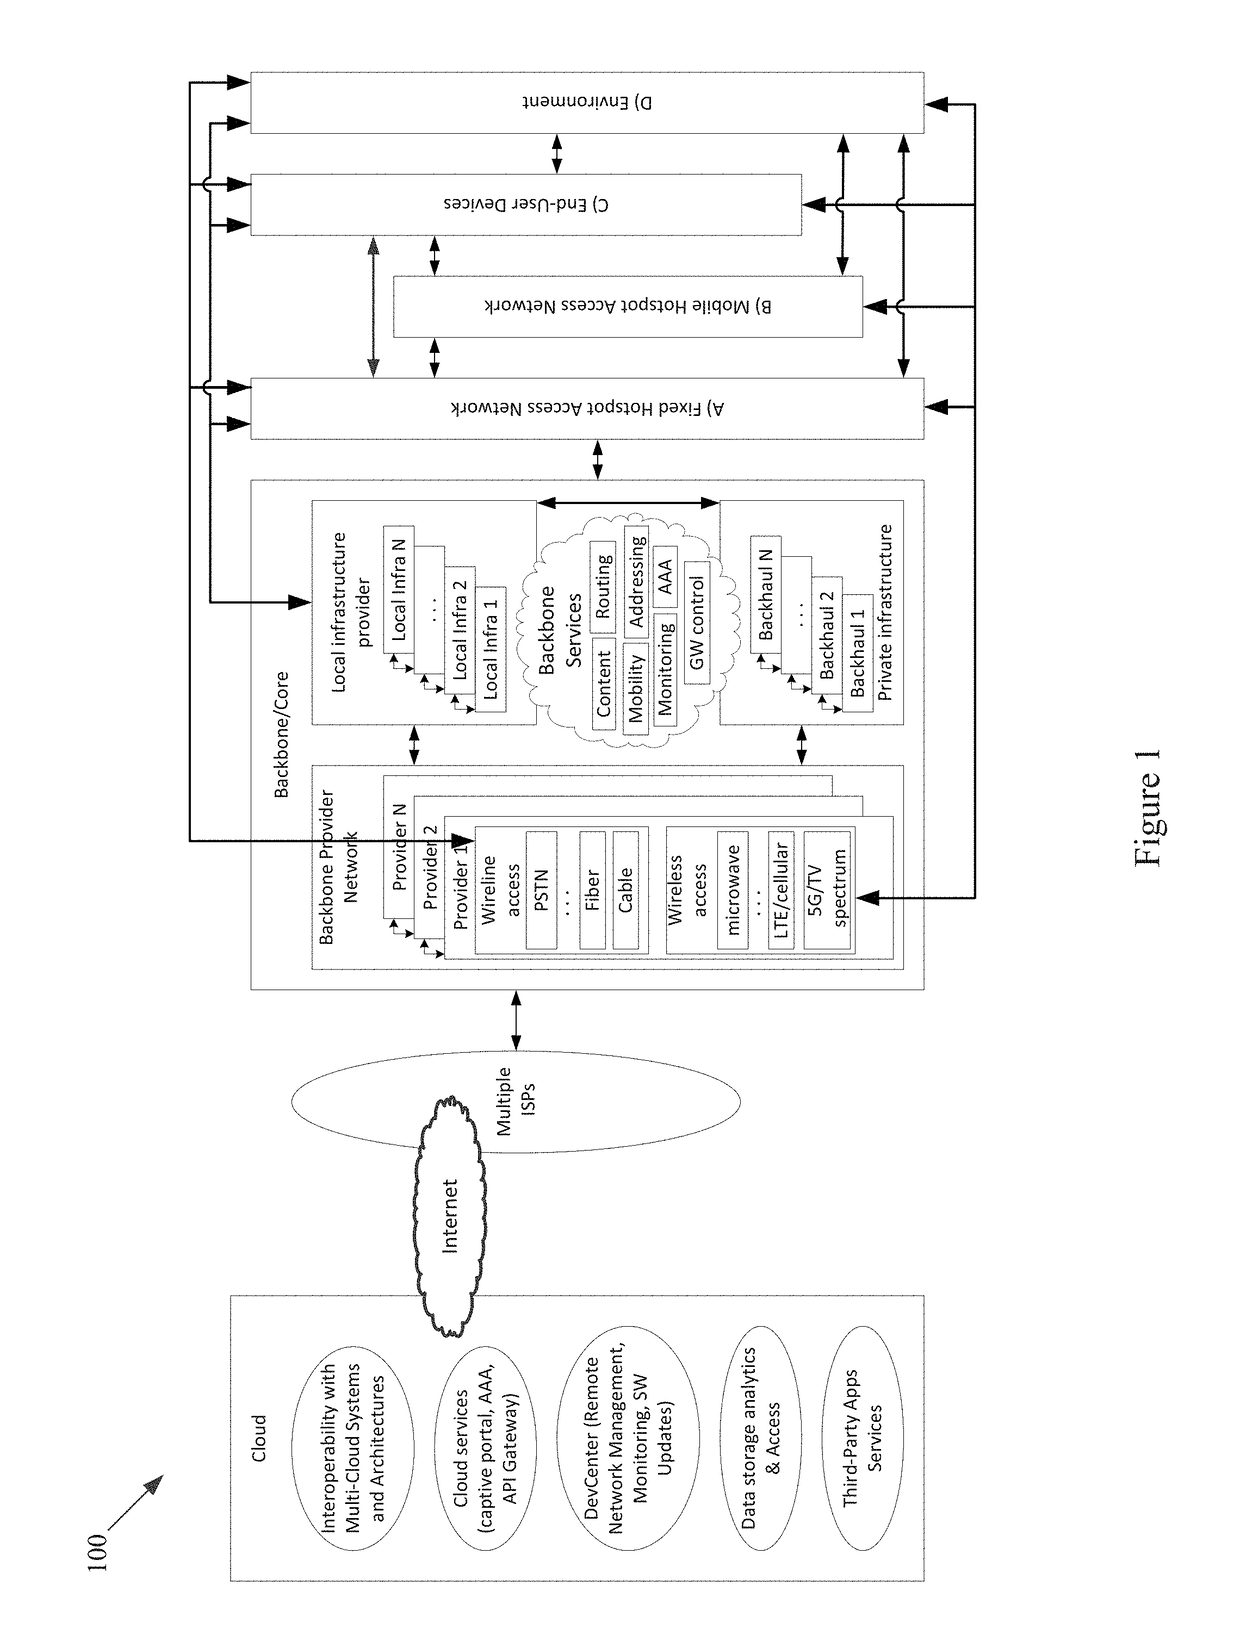 Methods and systems for optimal and adaptive urban scanning using self-organized fleets of autonomous vehicles